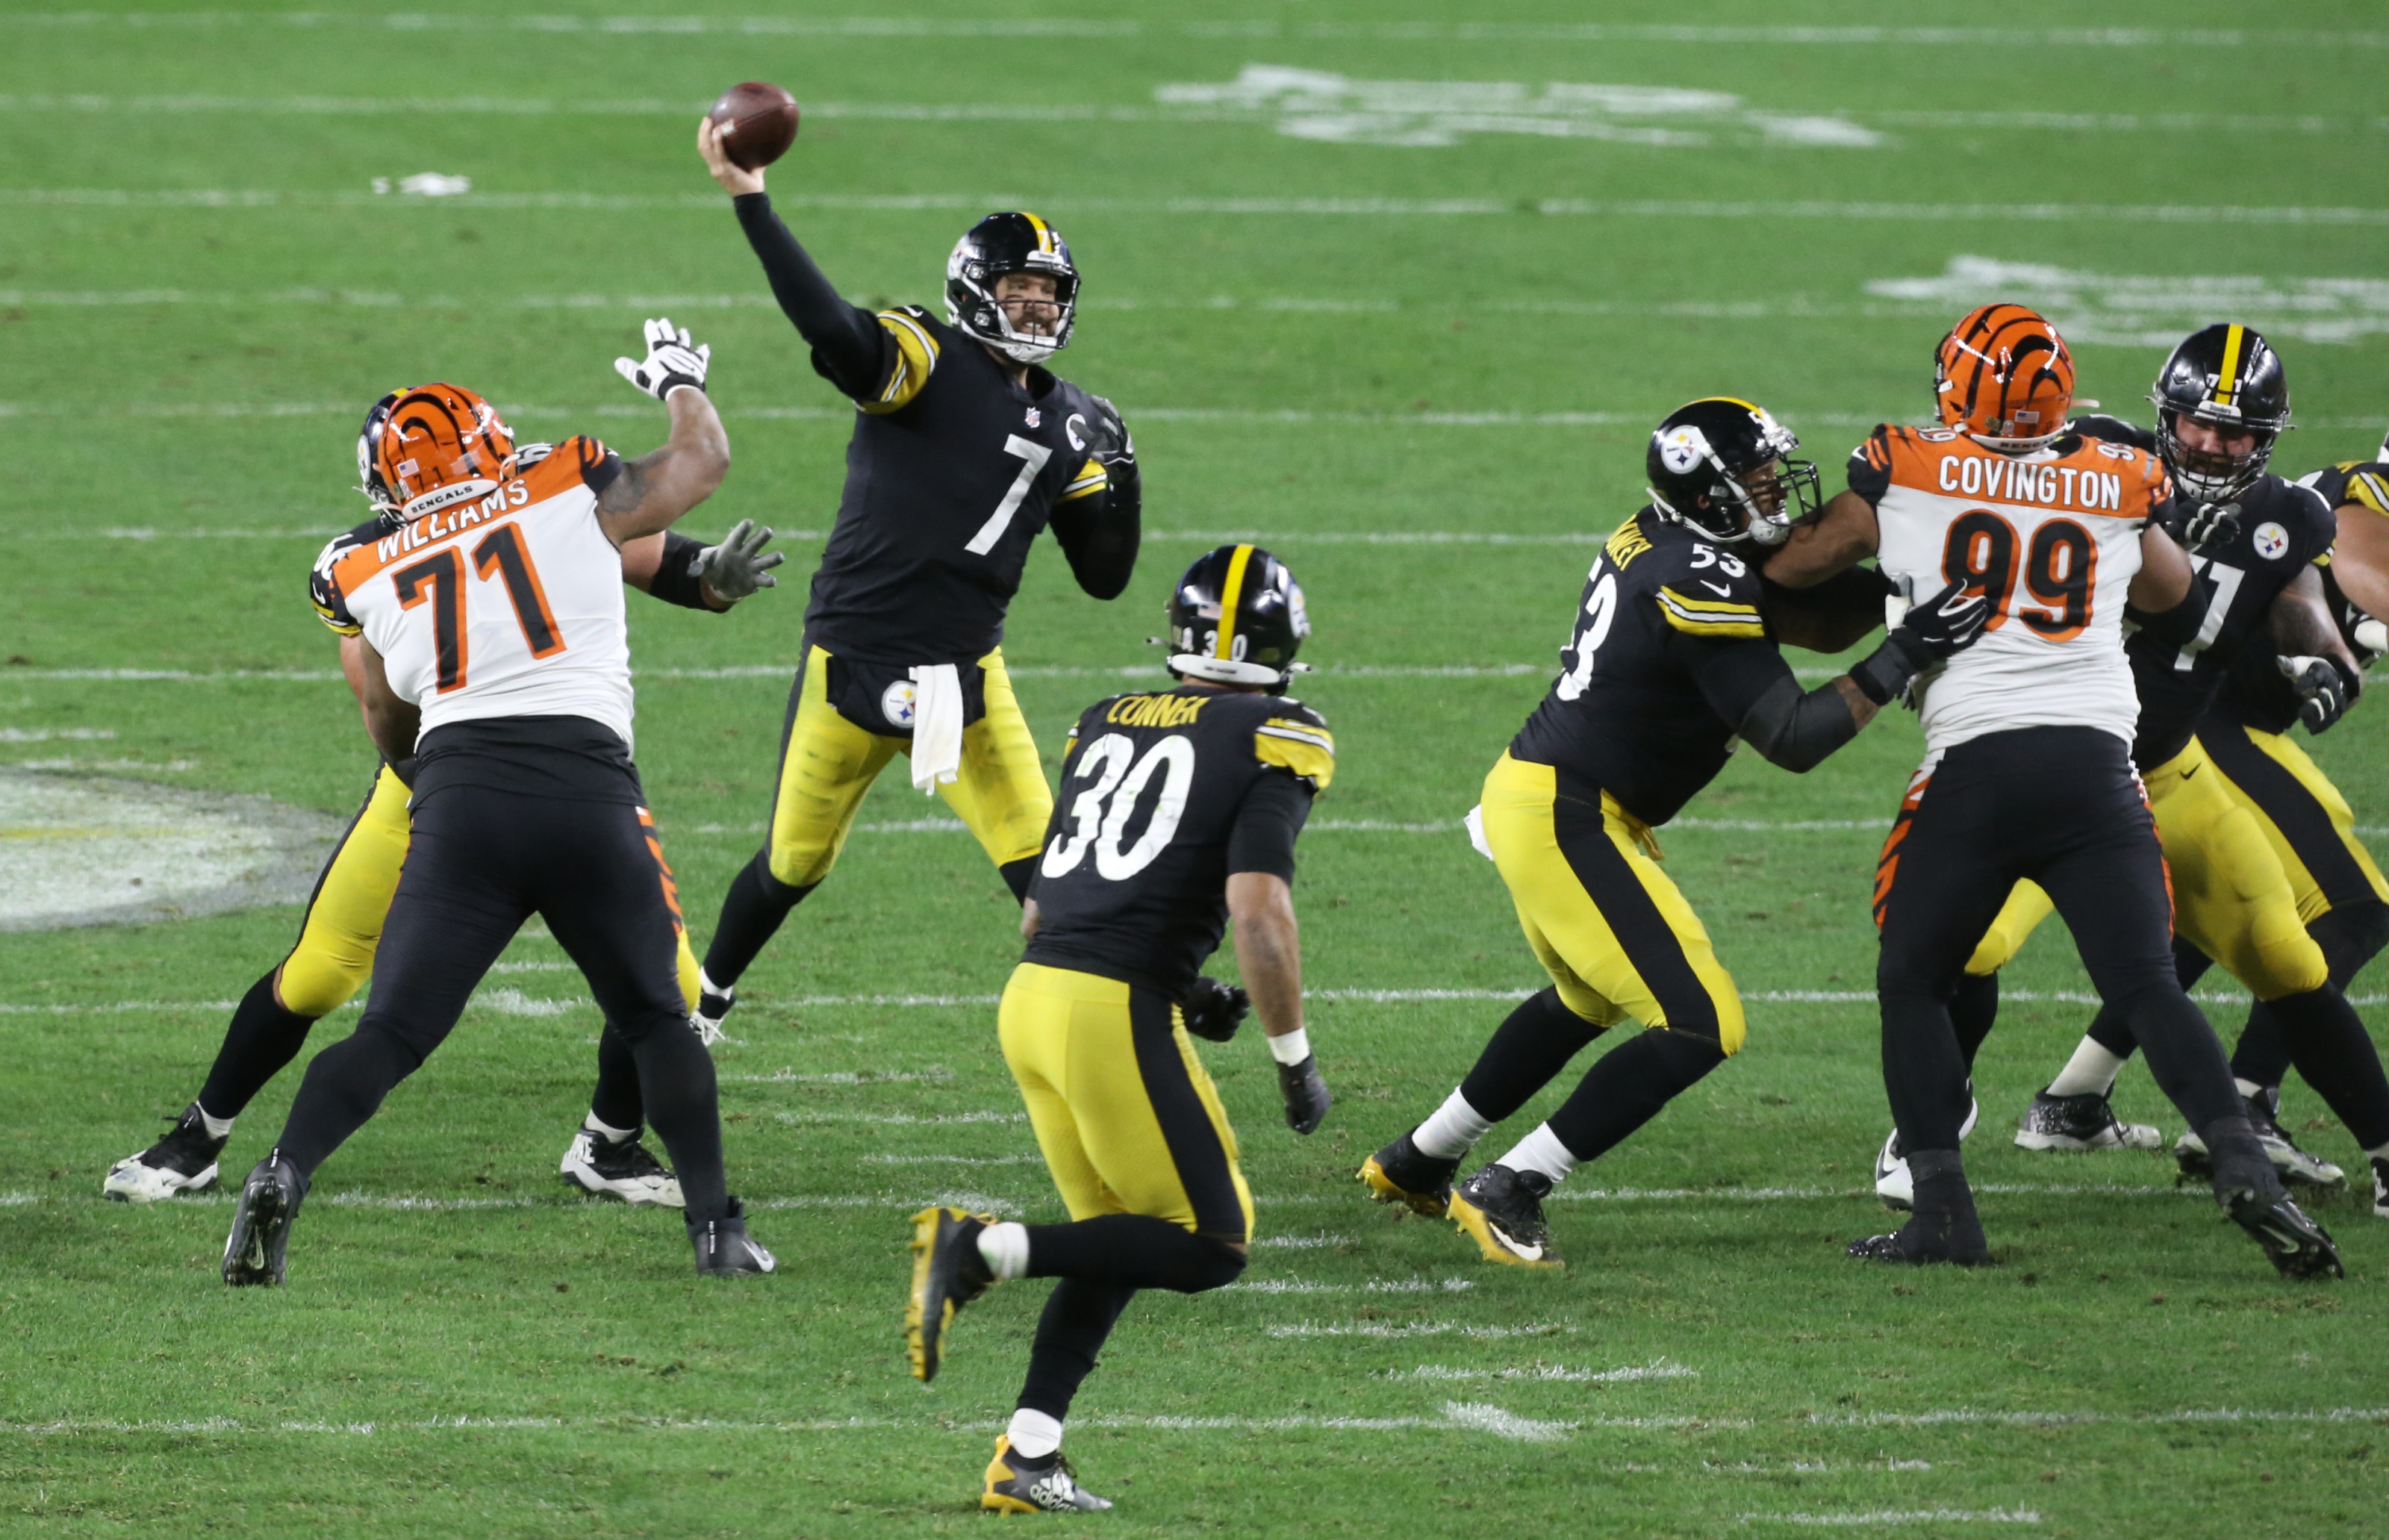 Steelers vs. Bengals live stream: How to watch online and game details